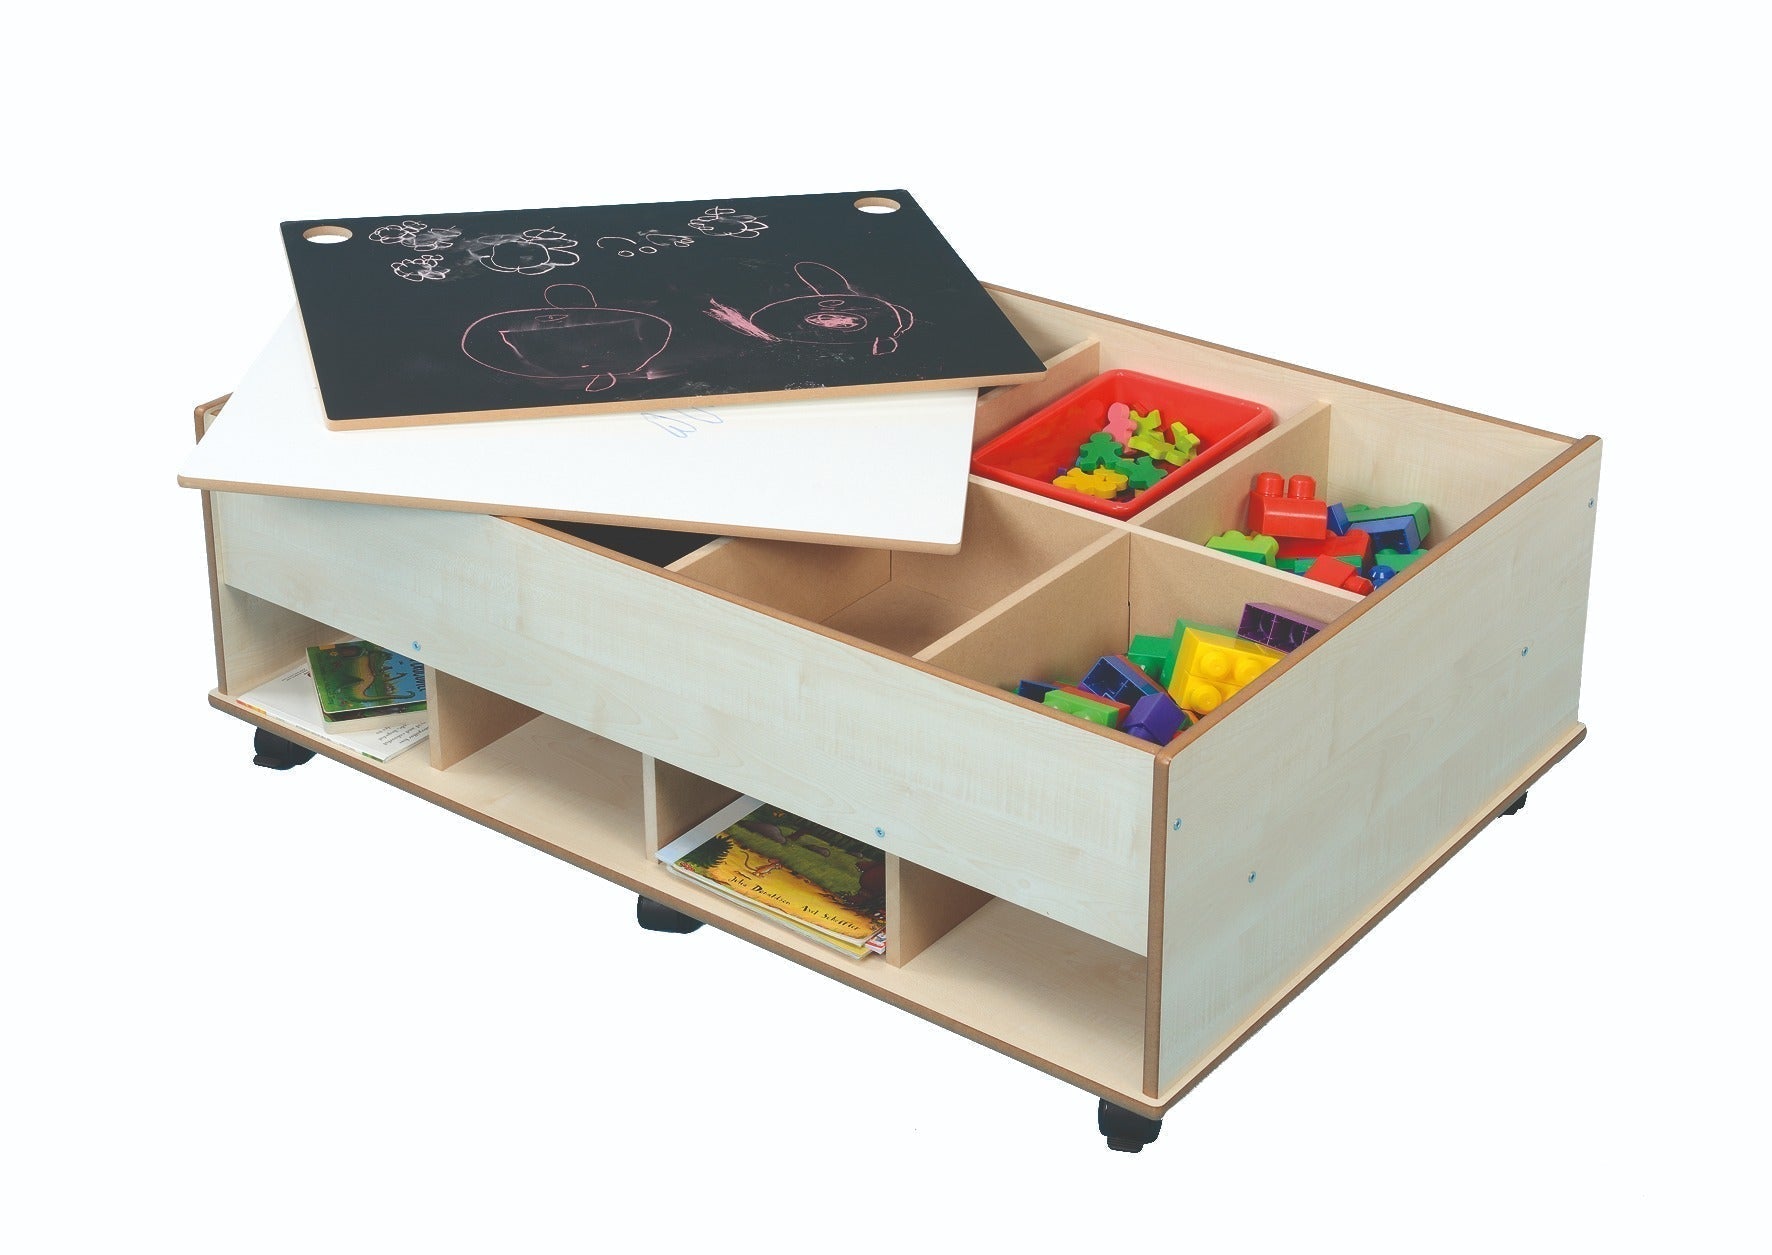 Chalkboard & Dry wipe Table, The Chalkboard and Dry wipe Storage Table is the perfect addition to any classroom or home learning environment. With its locking castors, it easily moves from one space to another, making it a versatile learning tool.Designed for children to engage in mark making, the Chalkboard & Dry wipe Table is the perfect height for them to comfortably kneel or stand while they draw. The surface area is large enough for an individual or small group to play and learn together.The reversible